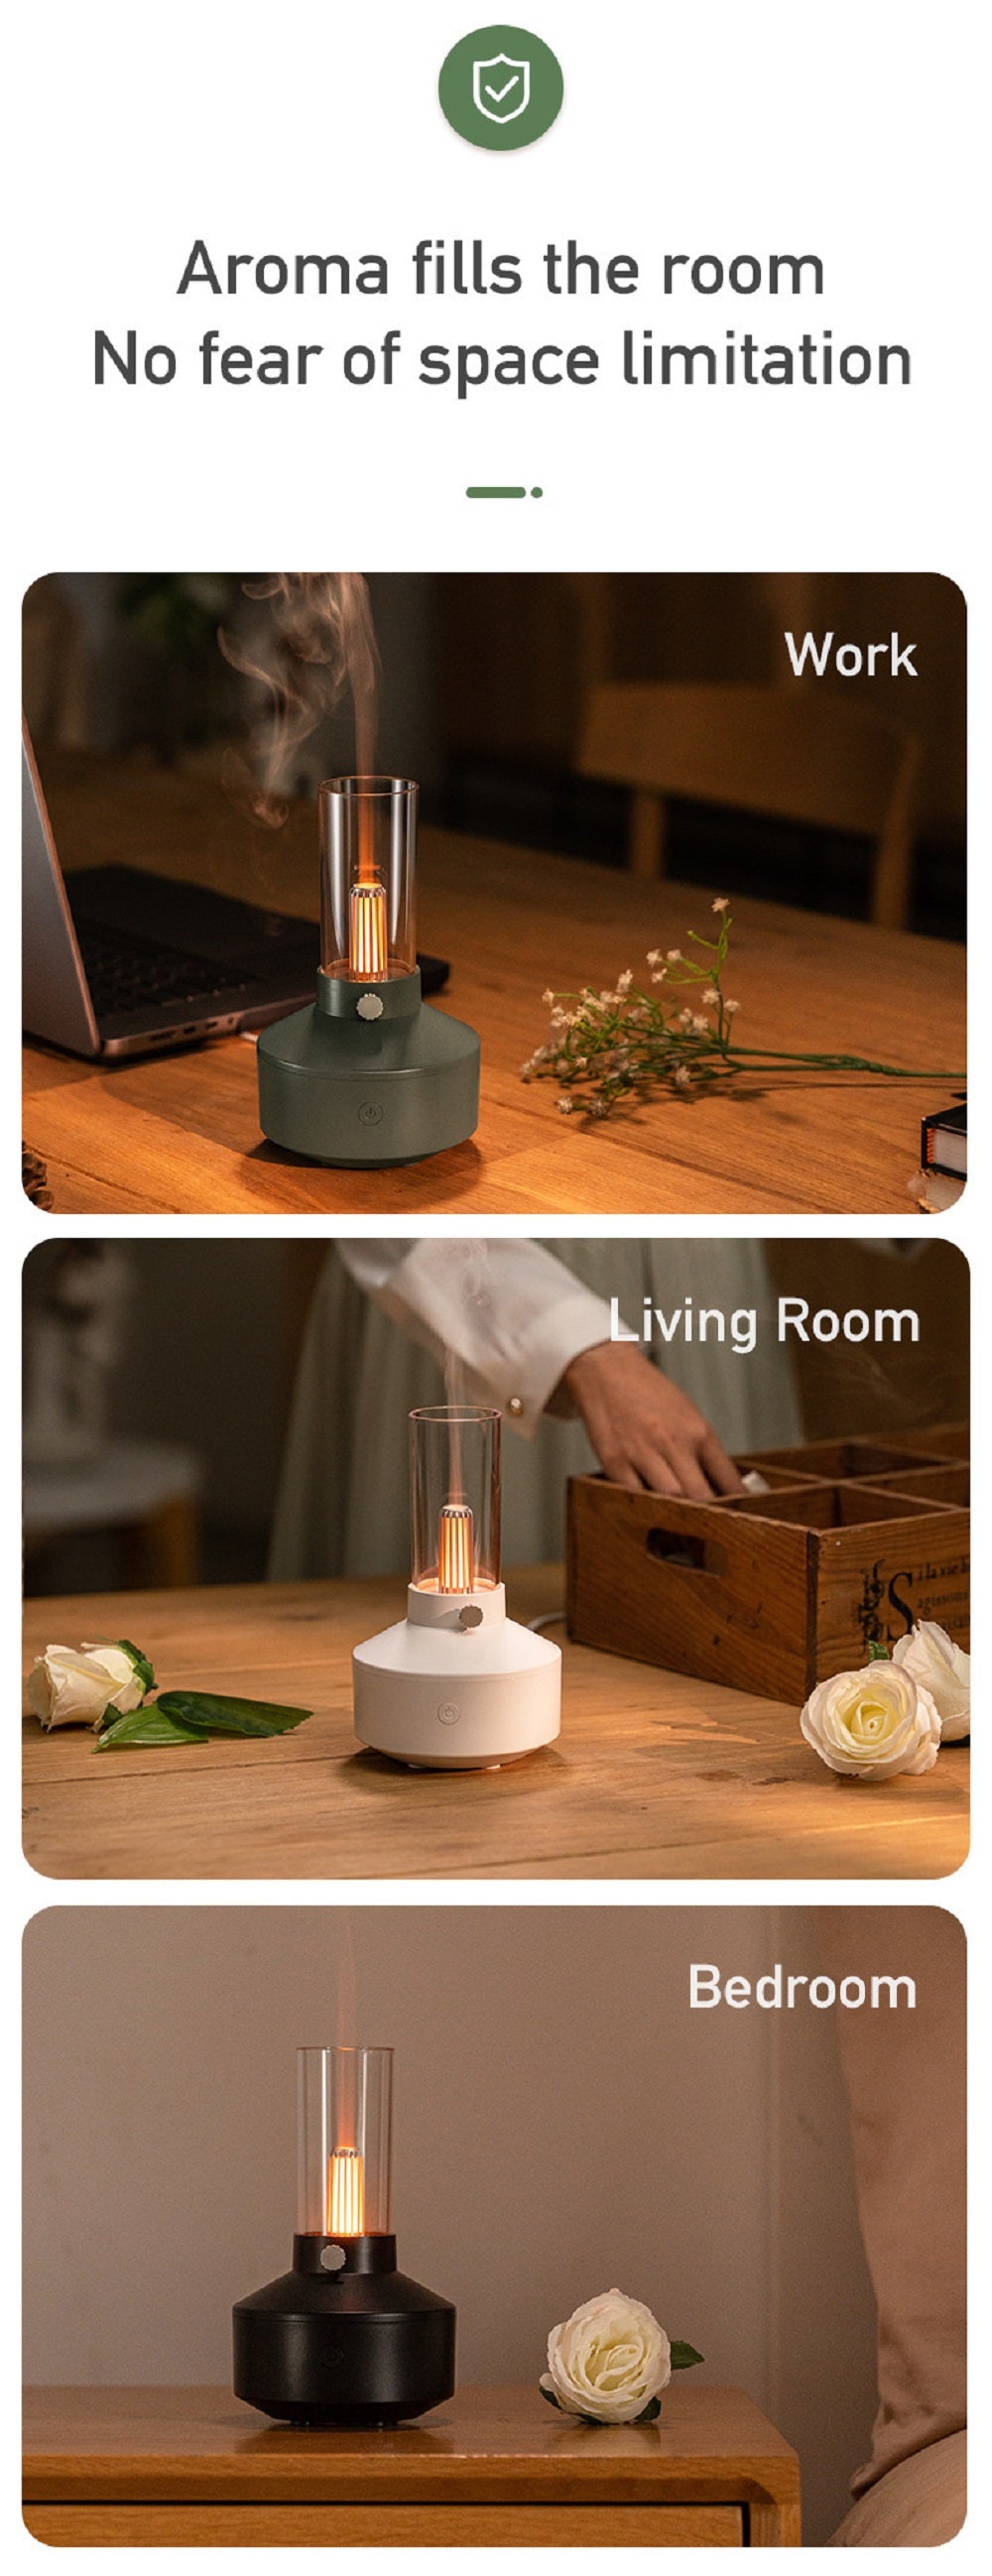 PickMeYA Candlelight Aroma Diffuser Portable Essential Oil Diffuser Noiseless USB Plug-in Desktop ambience Candlelight Home Aroma Diffuser Humidifier